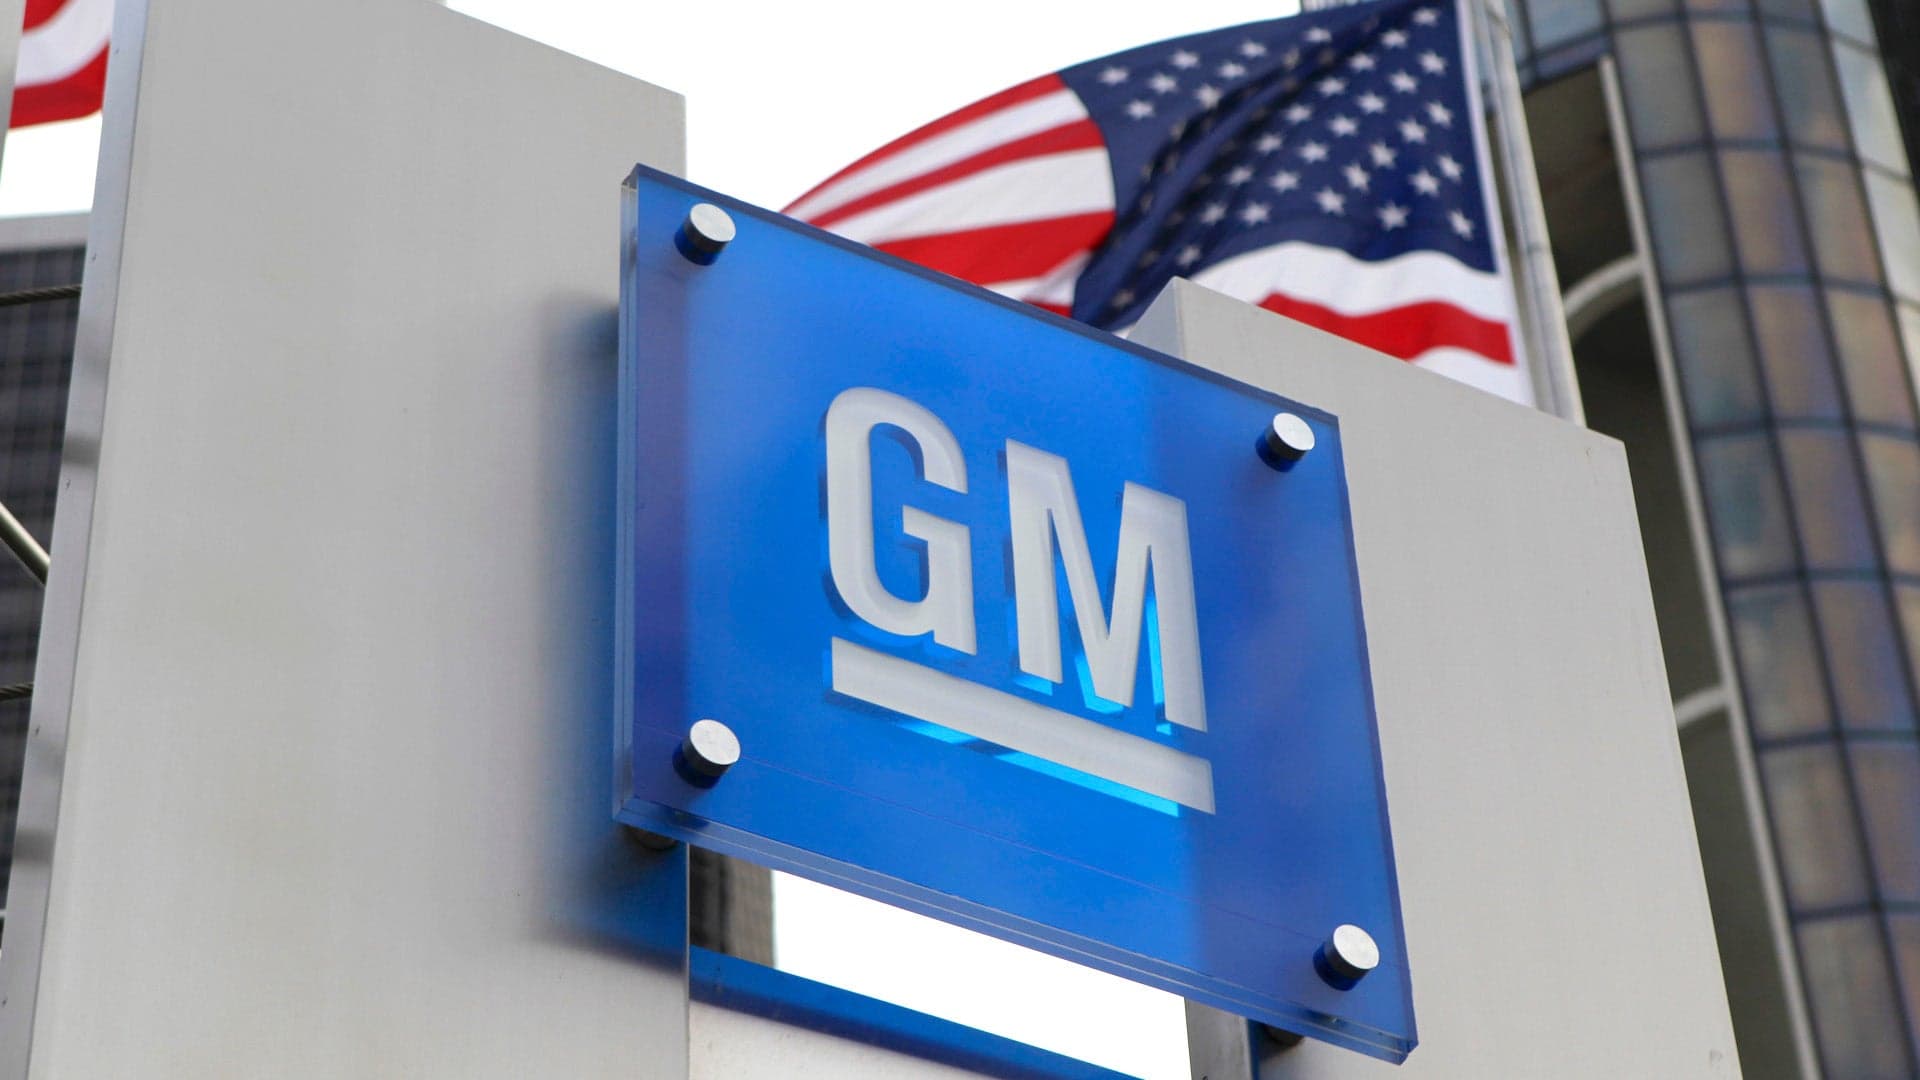 GM Going All-In on Electric, Working to Ready 20 New Cars by 2023